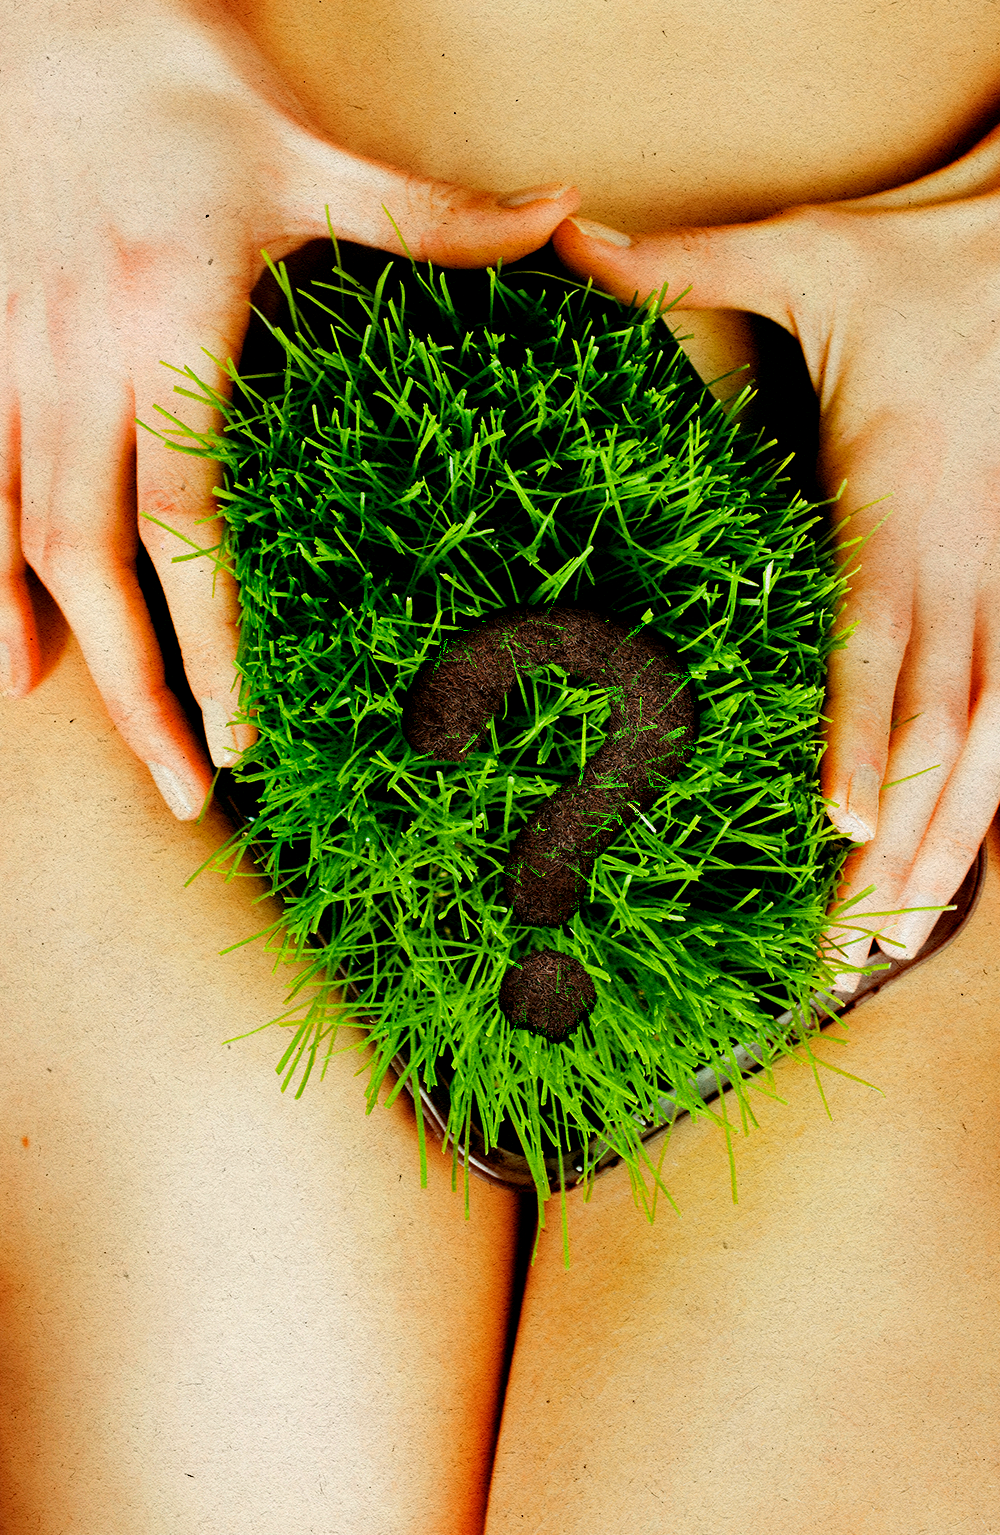 Your Pubic Hair Poses a Problem. It's time to have the manscaping… | by  Aliya S. King | LEVEL